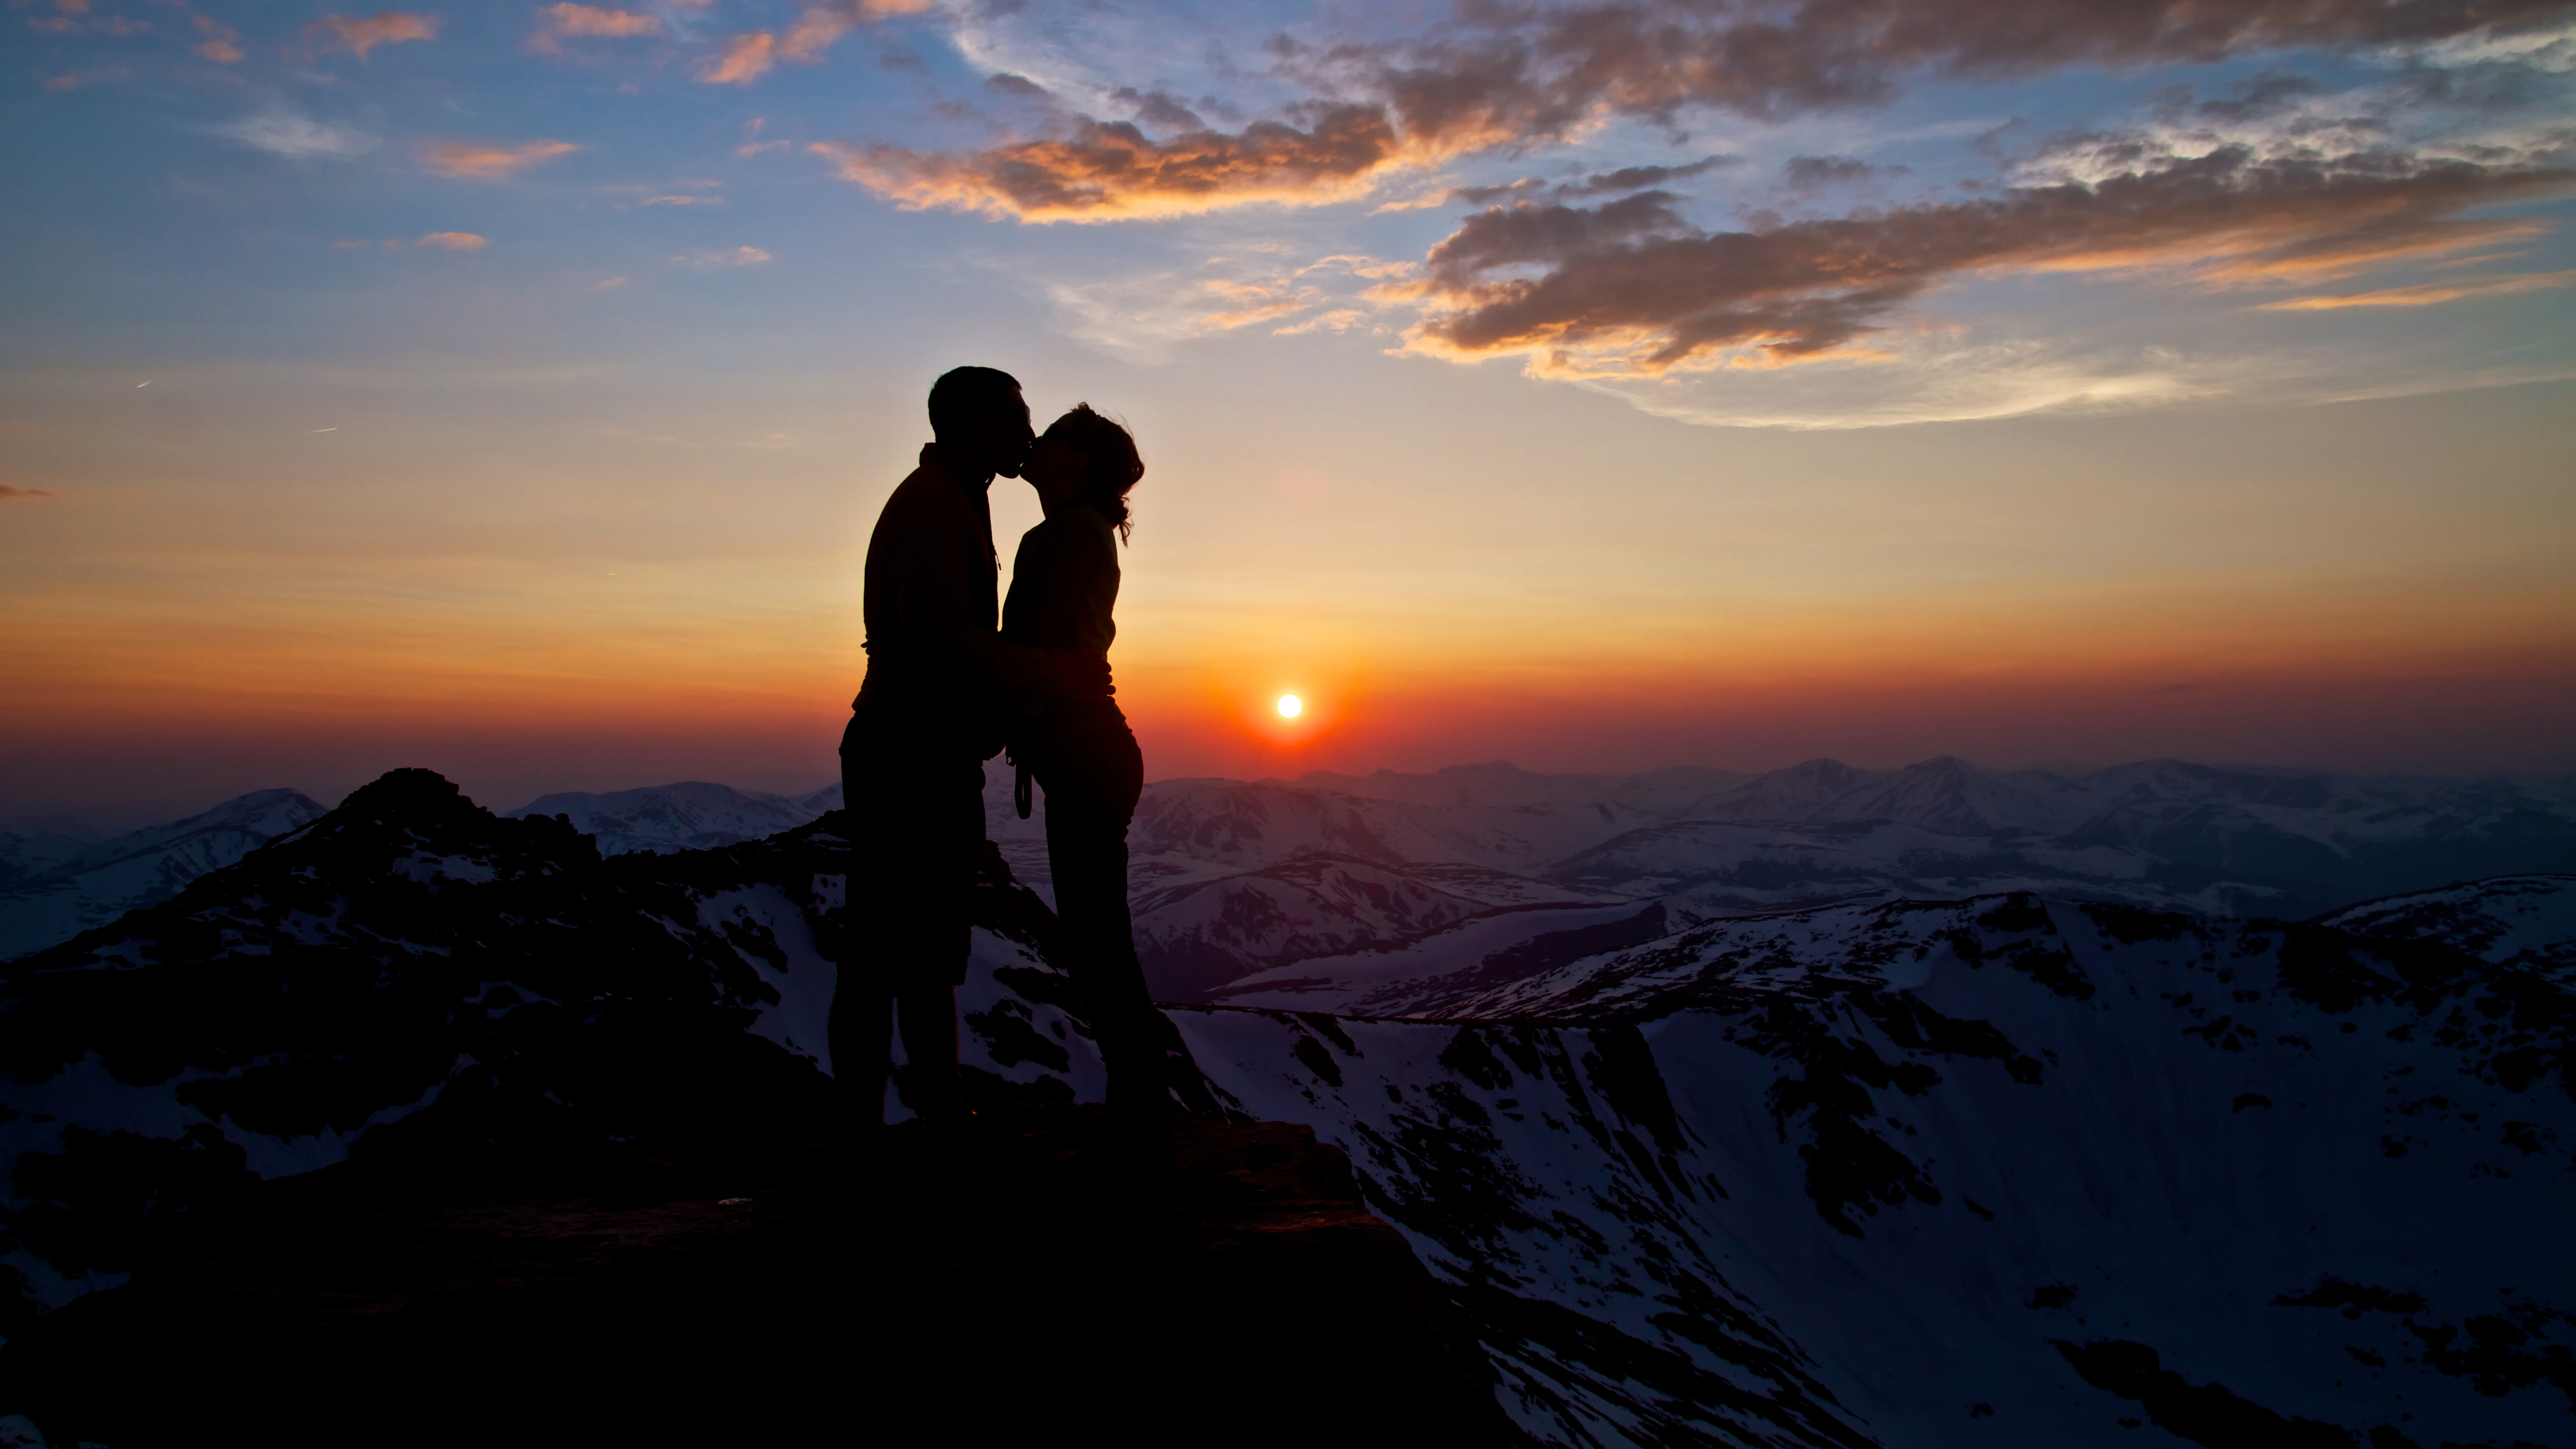 romantic wallpapers of kiss,people in nature,sky,sunrise,sunset,mountain